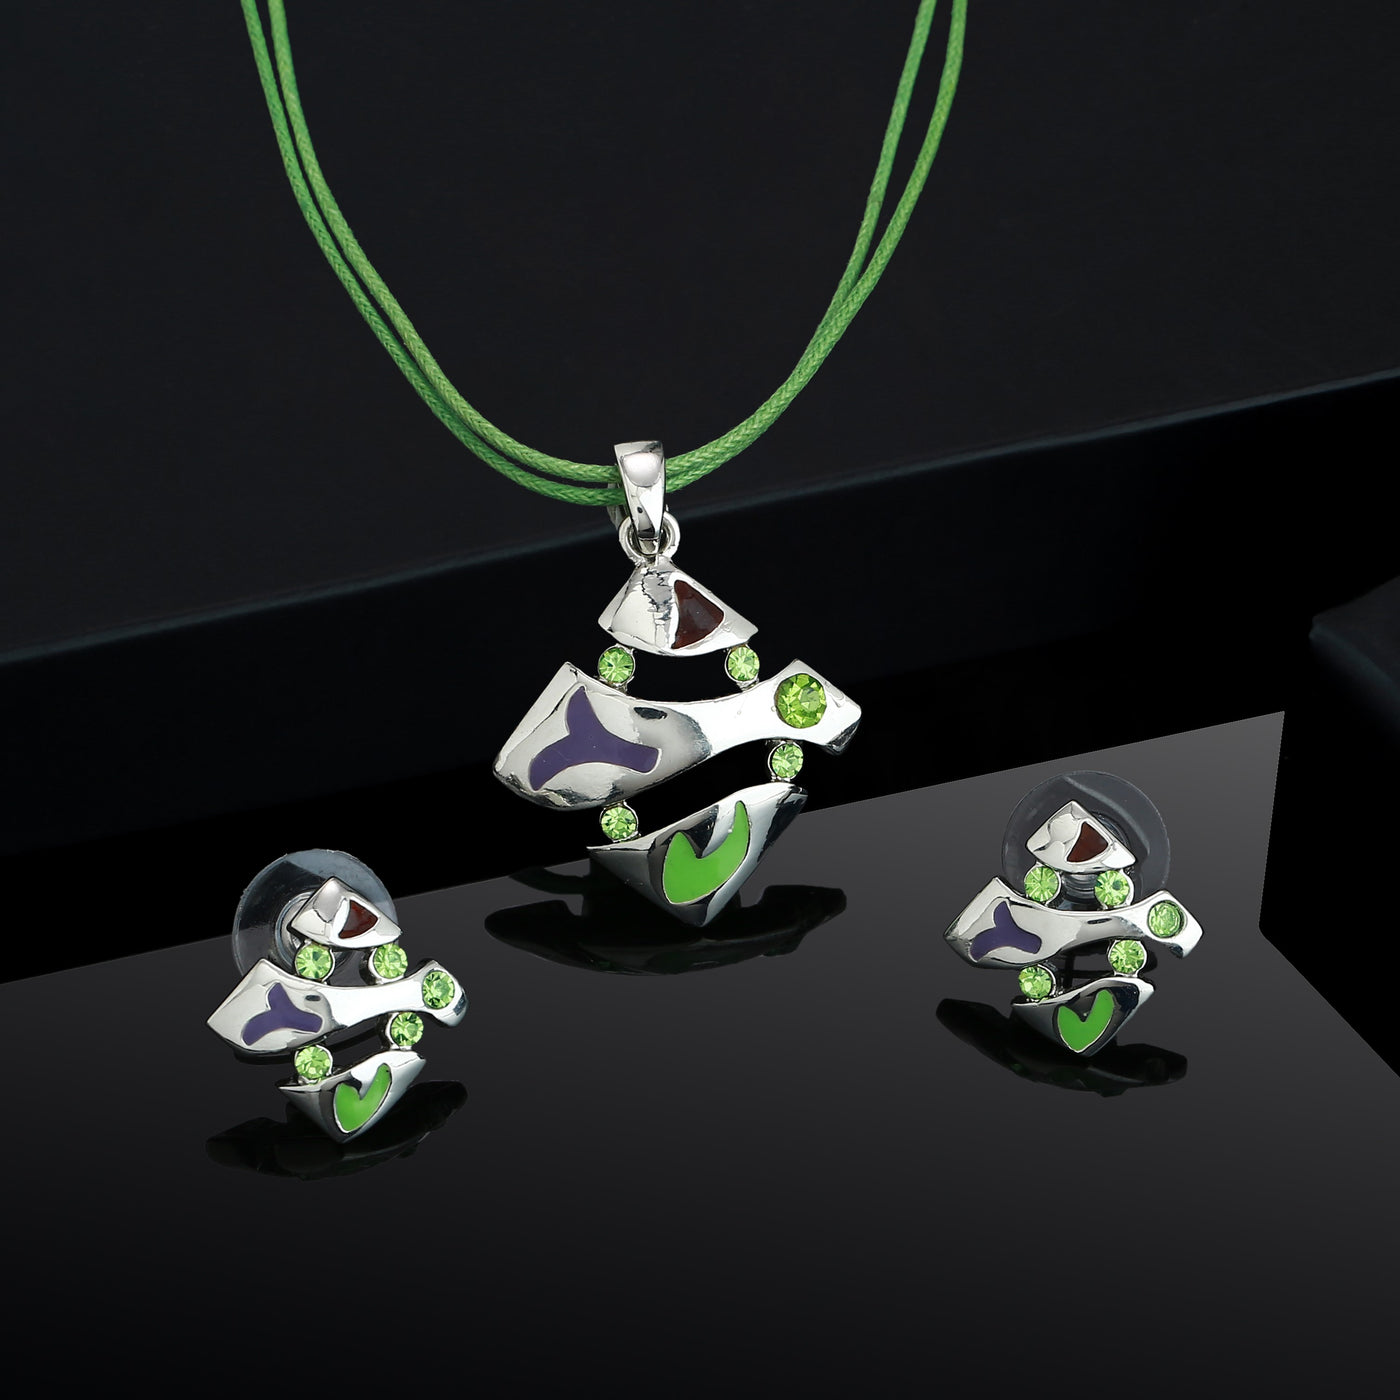 Estele Silver Tone Square Shape with Enamel and Crystal Necklace Set for Women